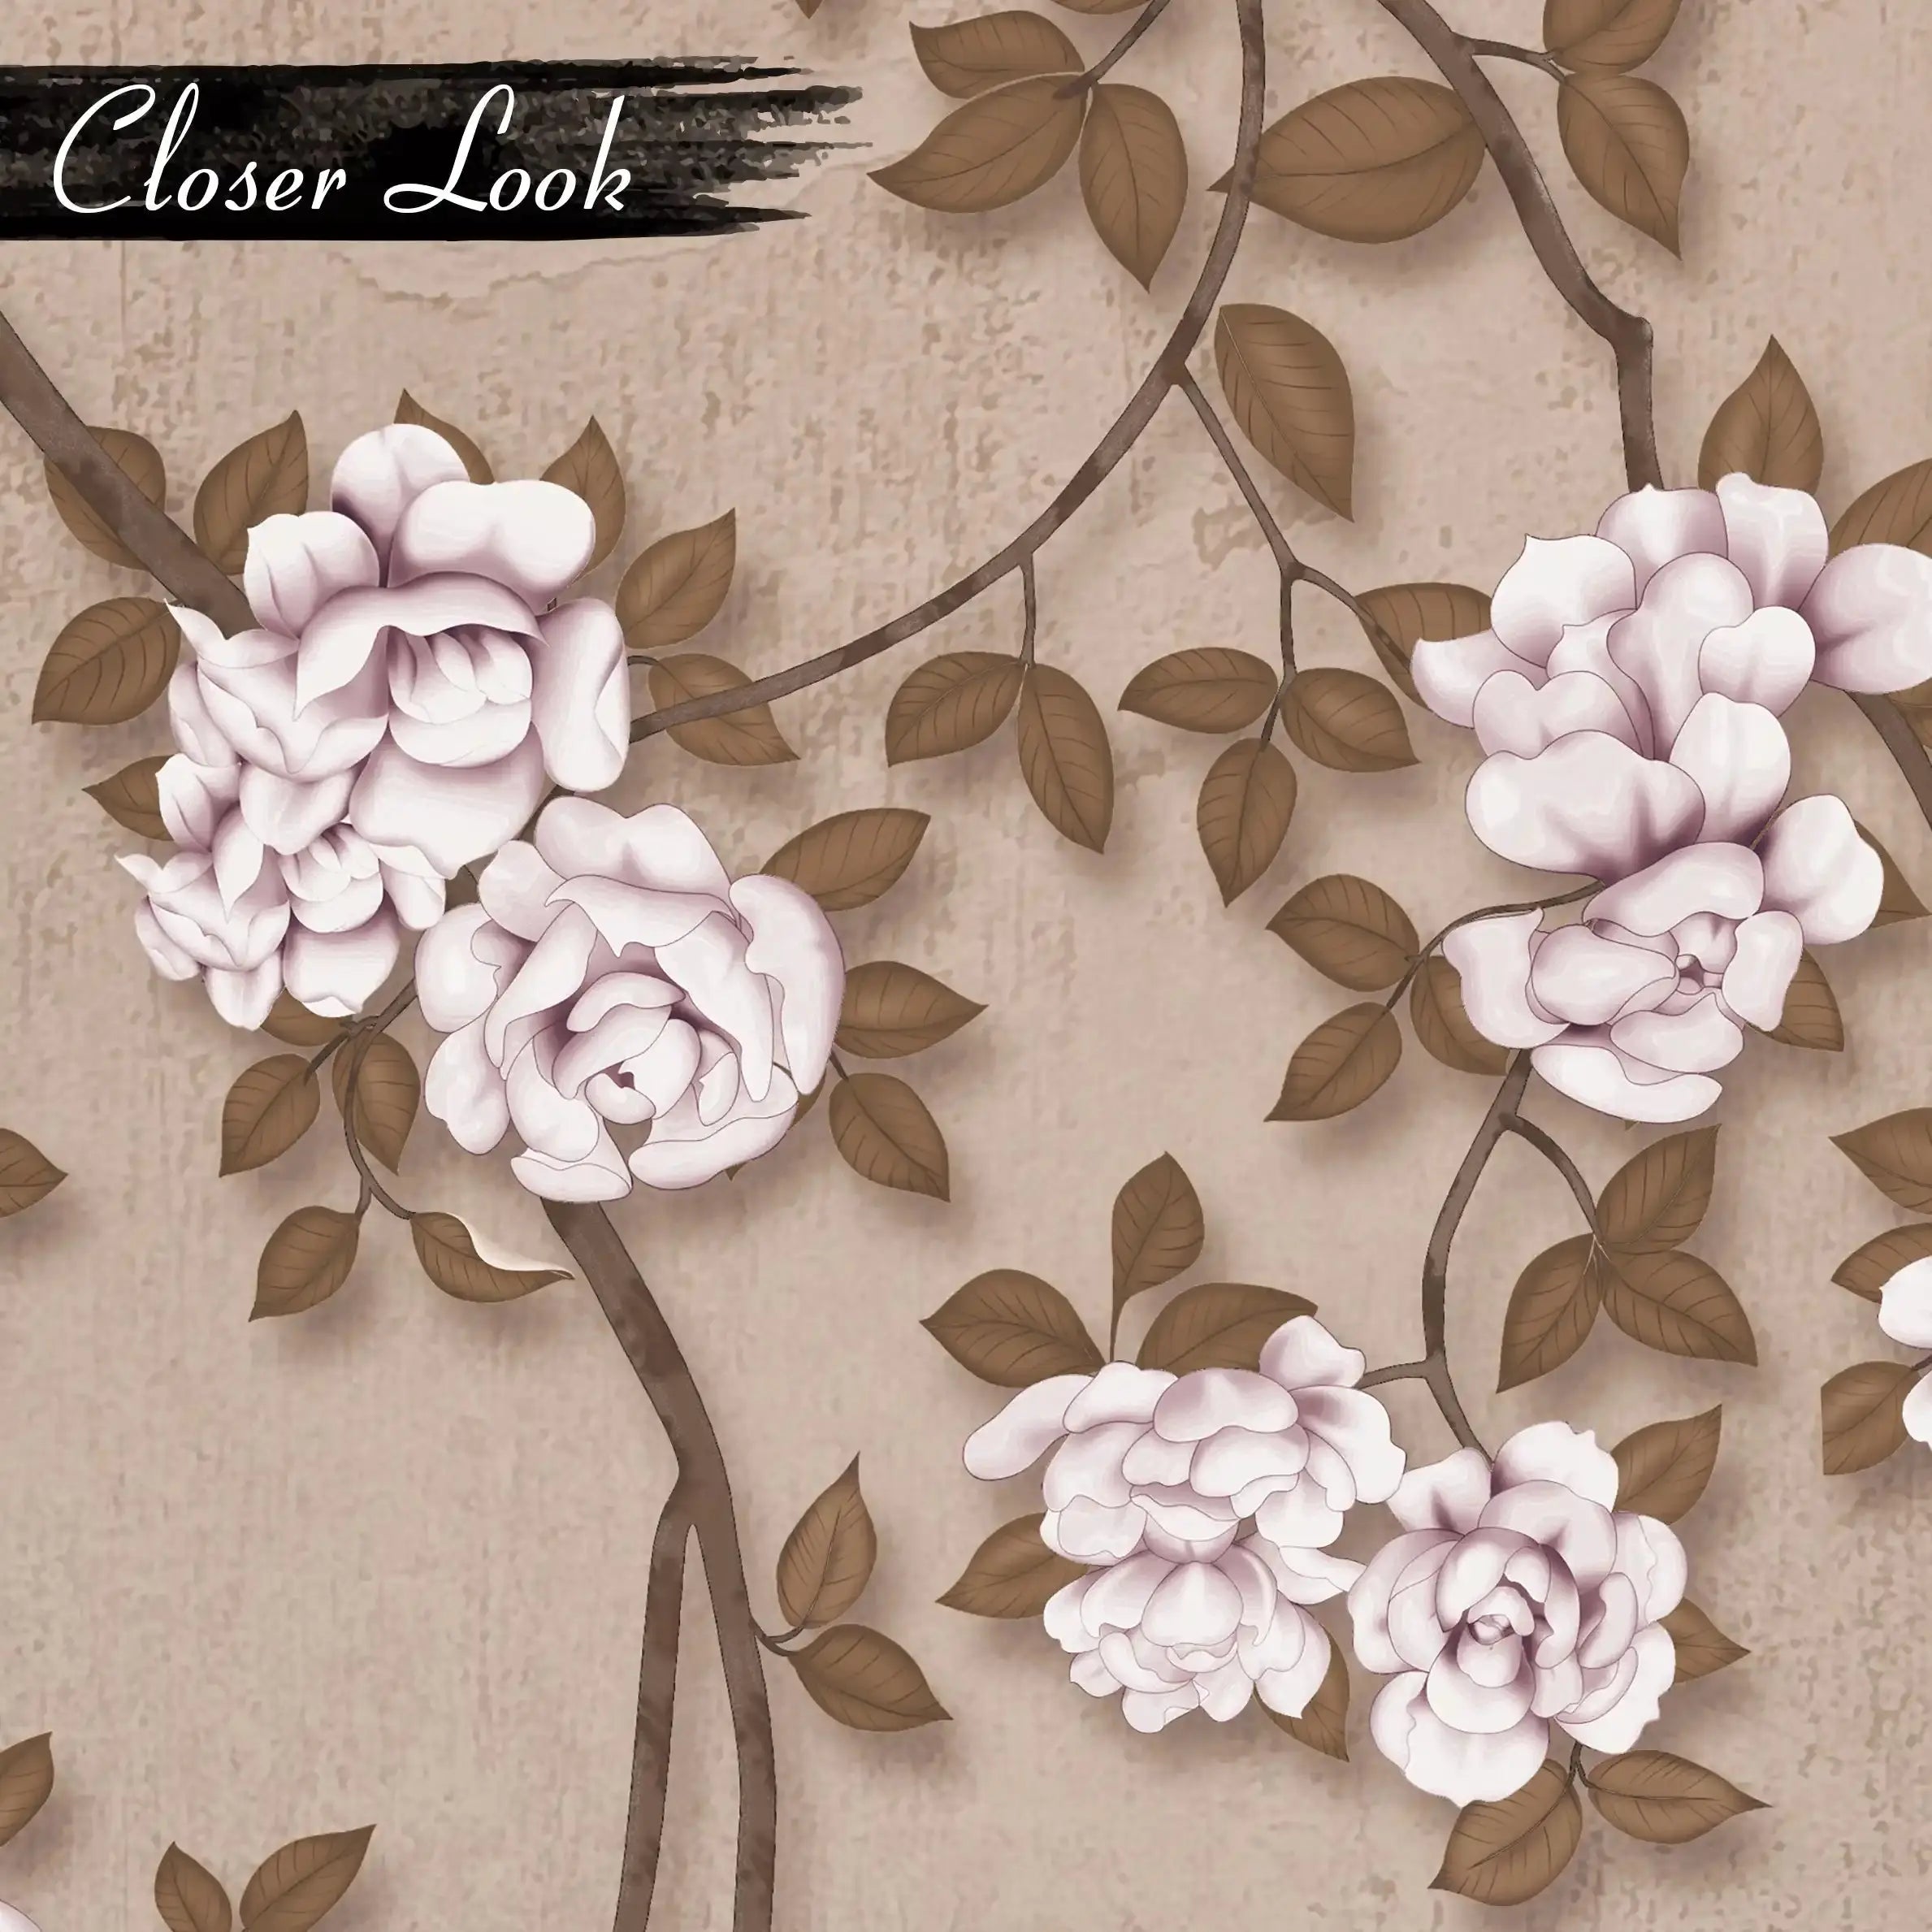 3028-D / Chinese Style Floral Peel and Stick Wallpaper: Easy Install, Adhesive Mural for Walls - Artevella